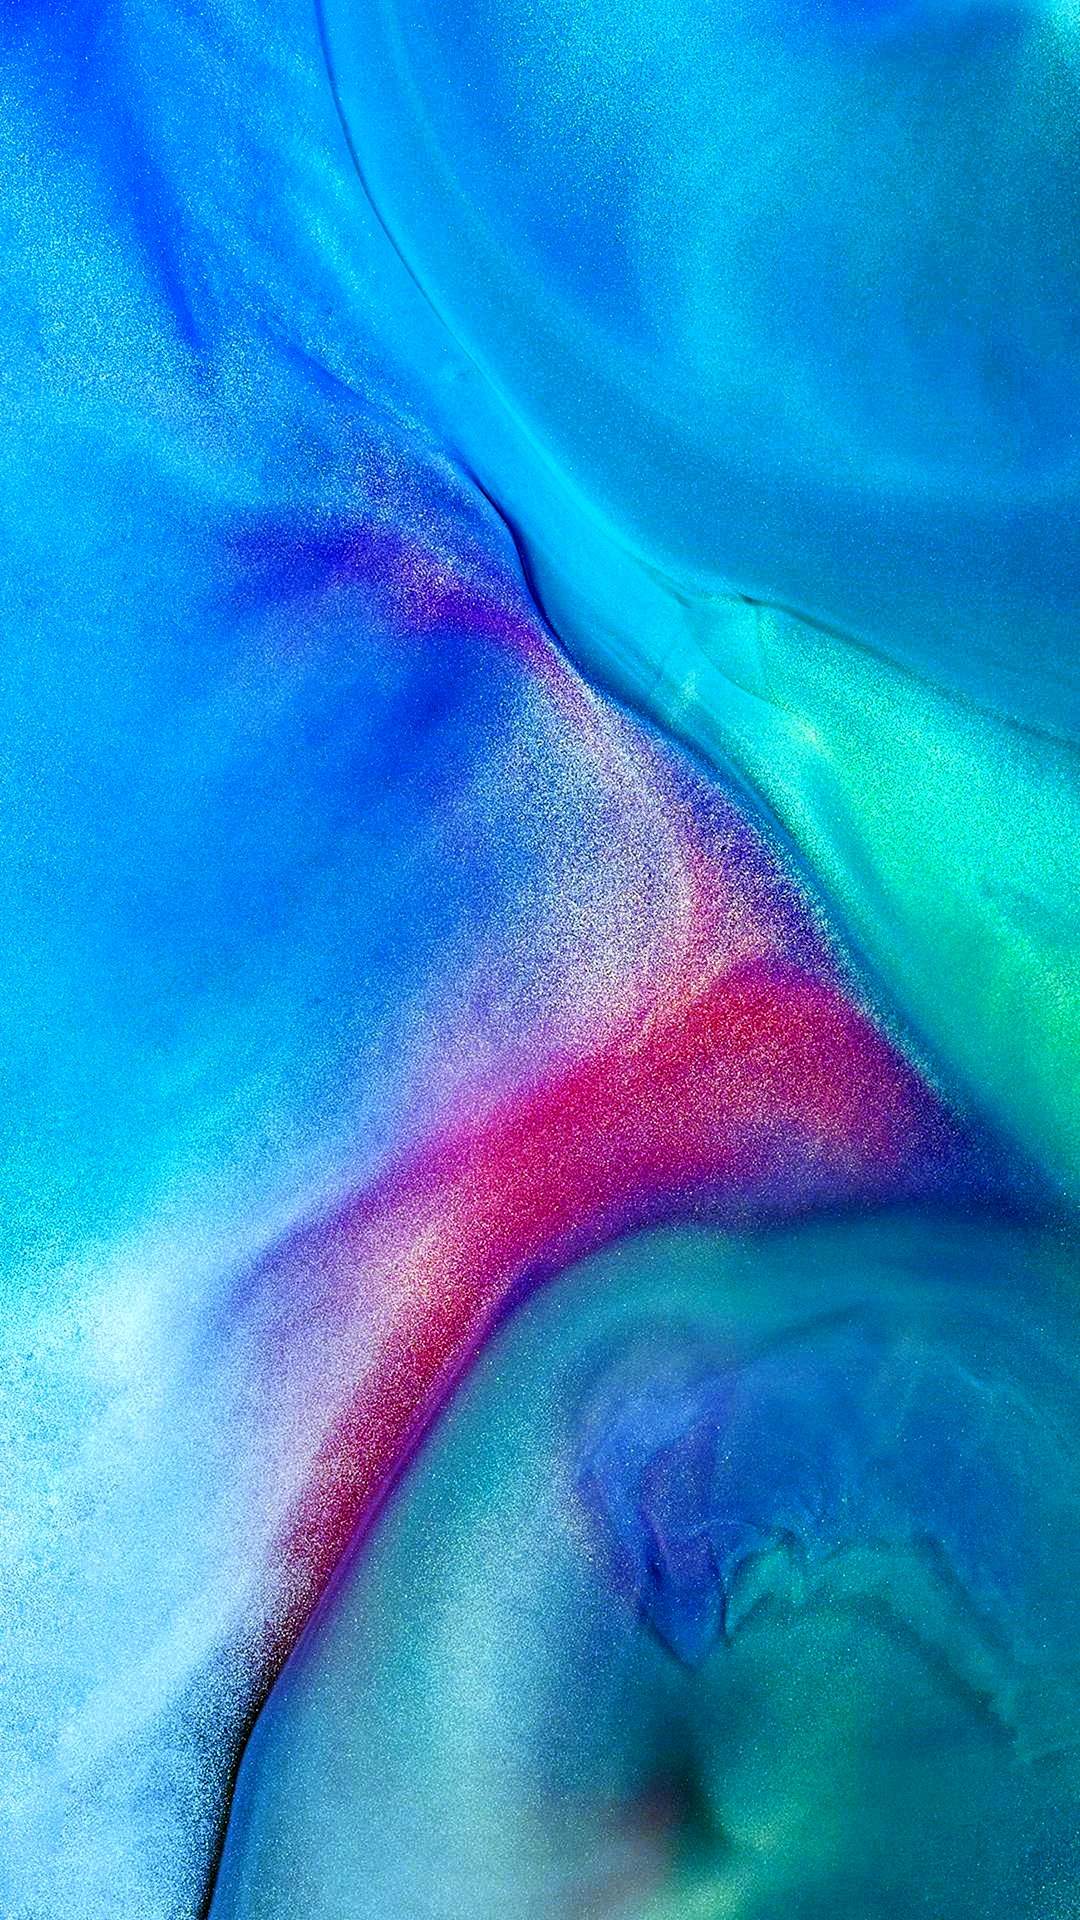 Huawei P30 Wallpaper For iPhone